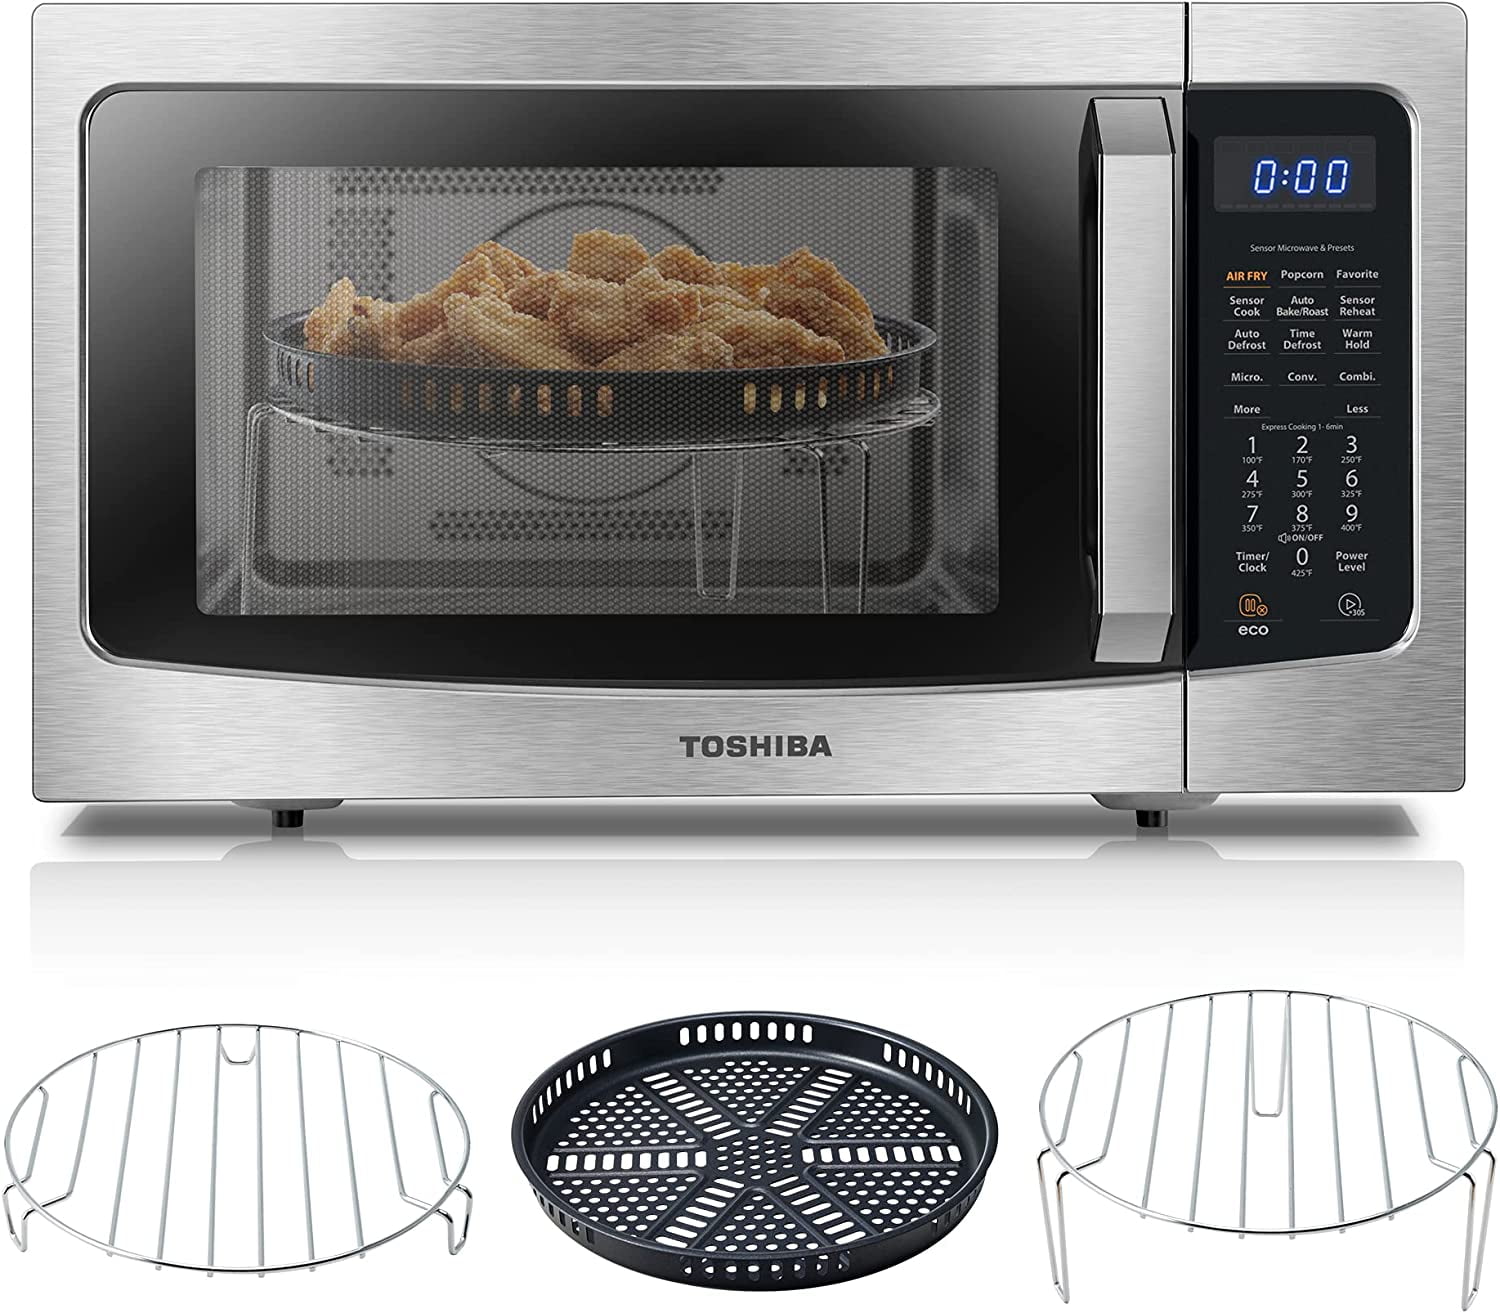 TOSHIBA Air Fryer Combo 8-in-1 Countertop Microwave Oven, Convection,  Broil, Odor removal, Mute Function, 12.4 Position Memory Turntable with  1.0 Cu. for Sale in Phoenix, AZ - OfferUp